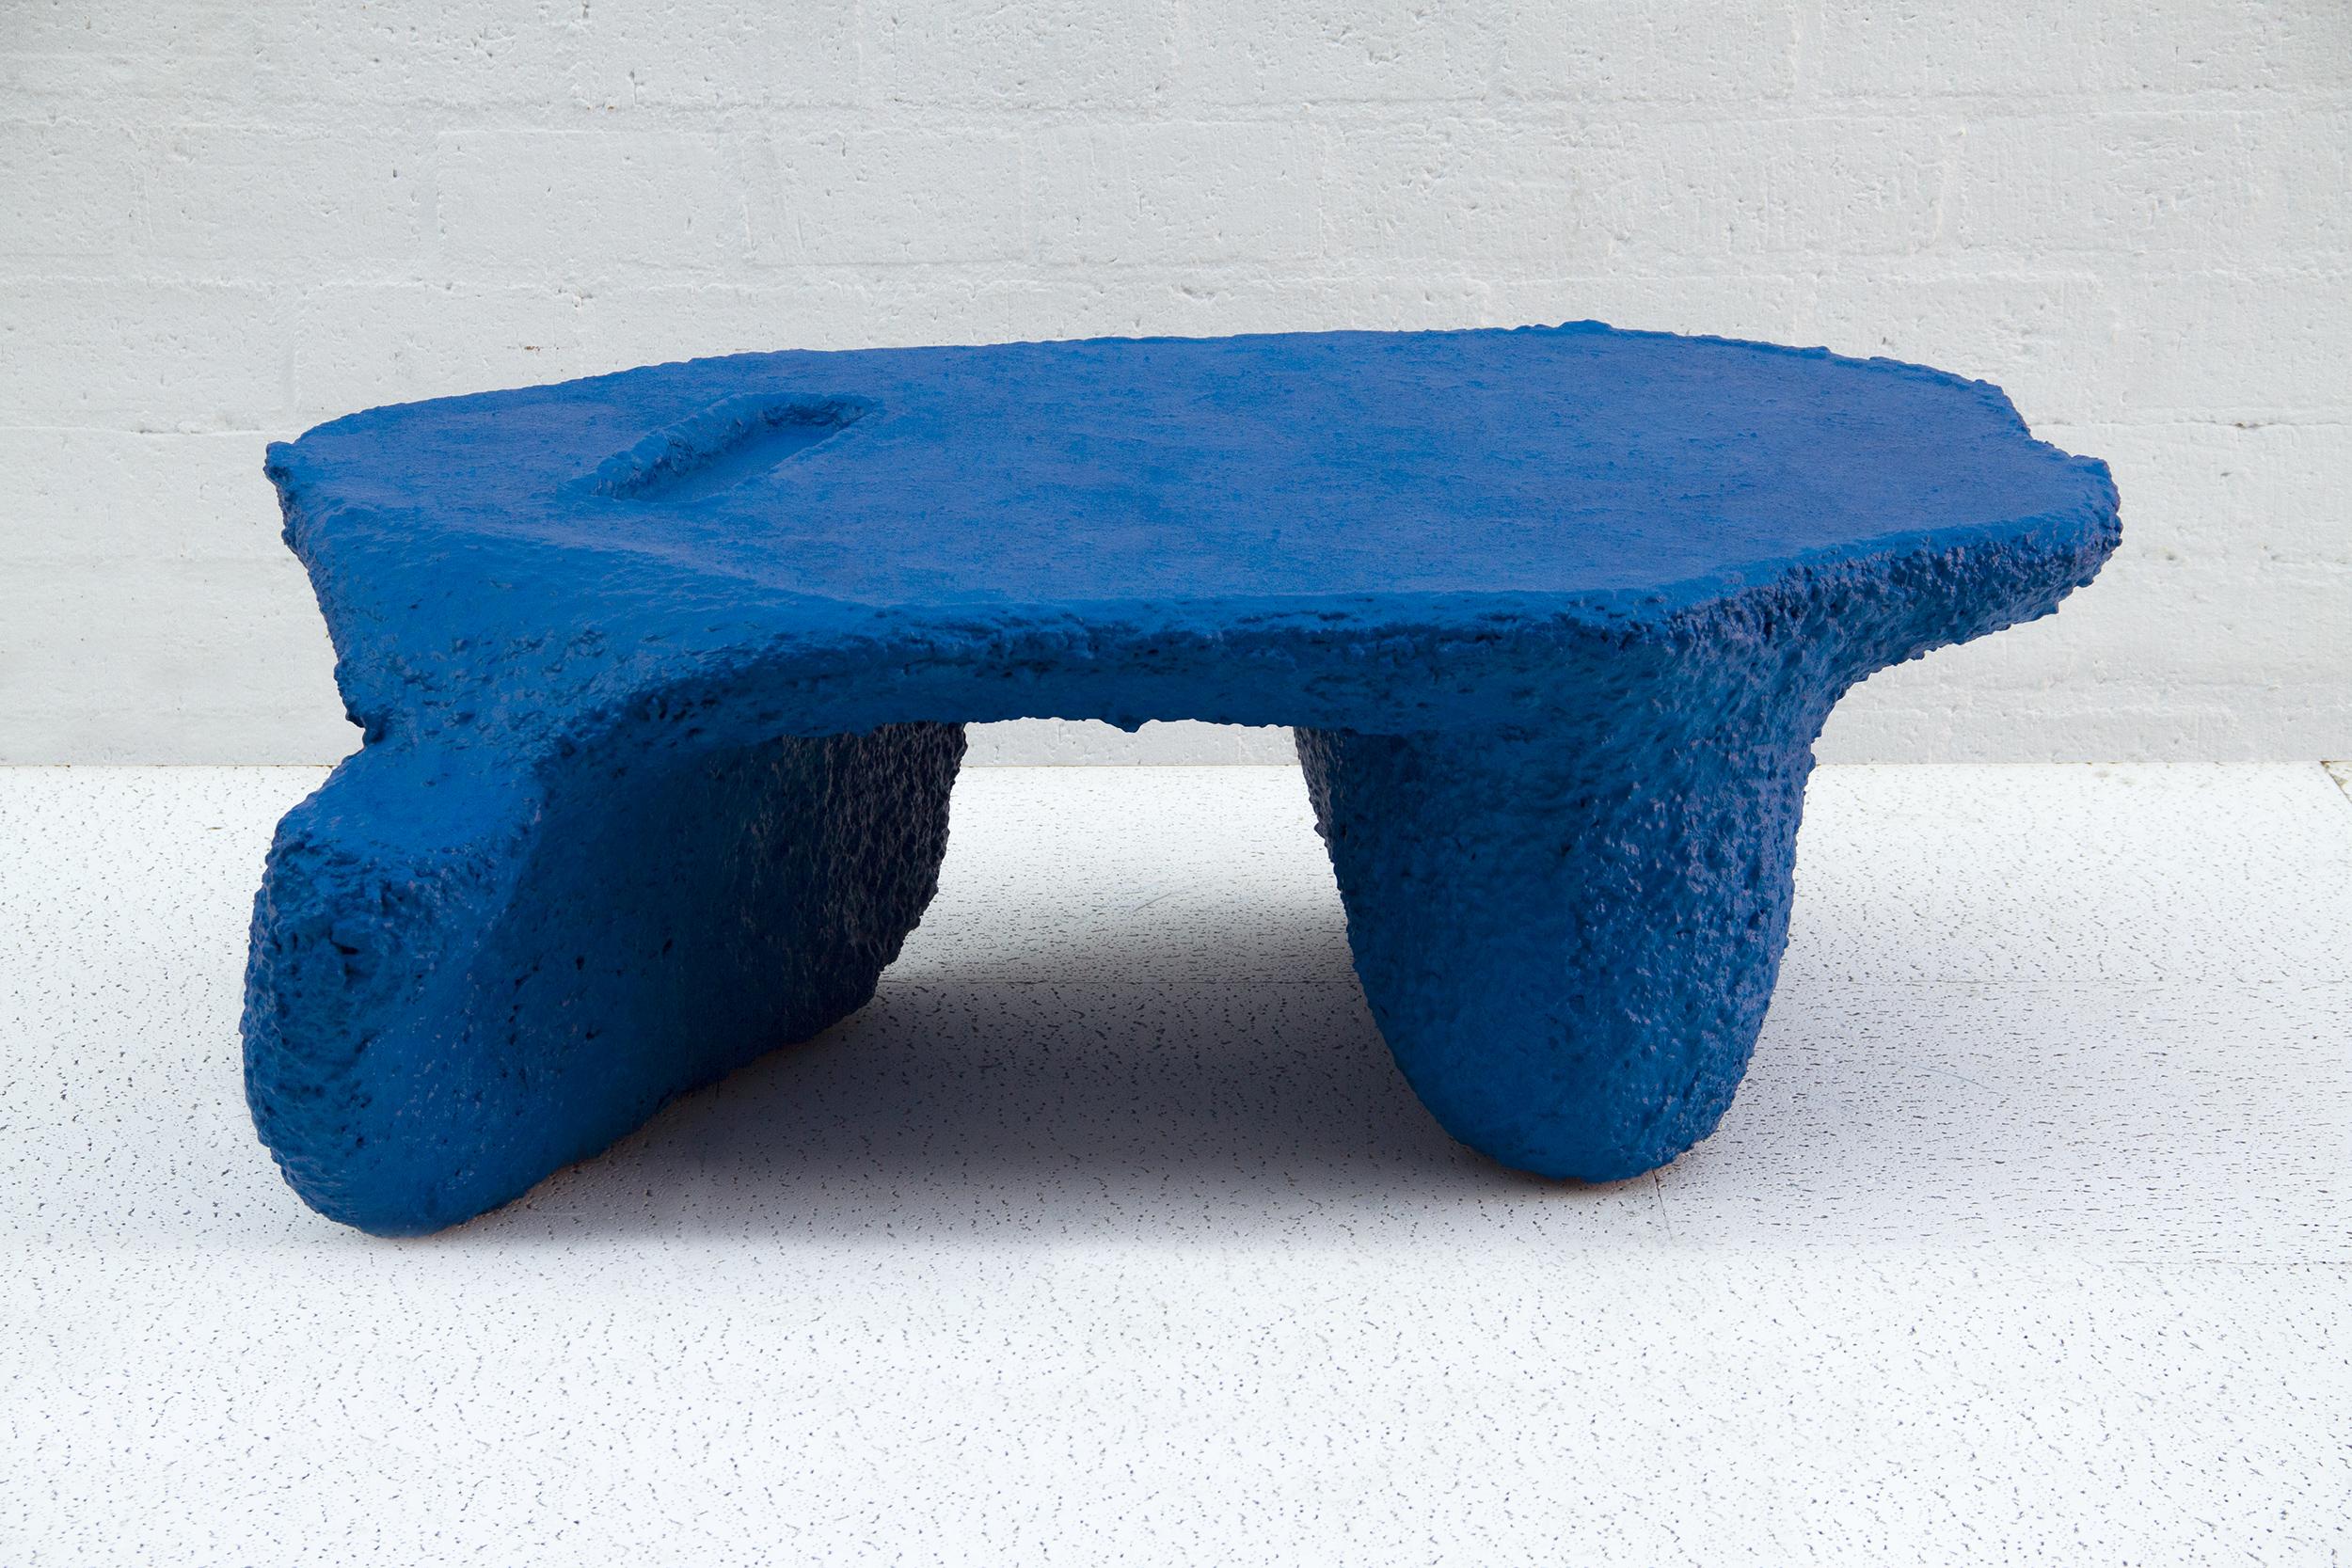 Composition LaMesa, Coffee Table, Contemporary Design, Blue, Table, Limited Edition For Sale